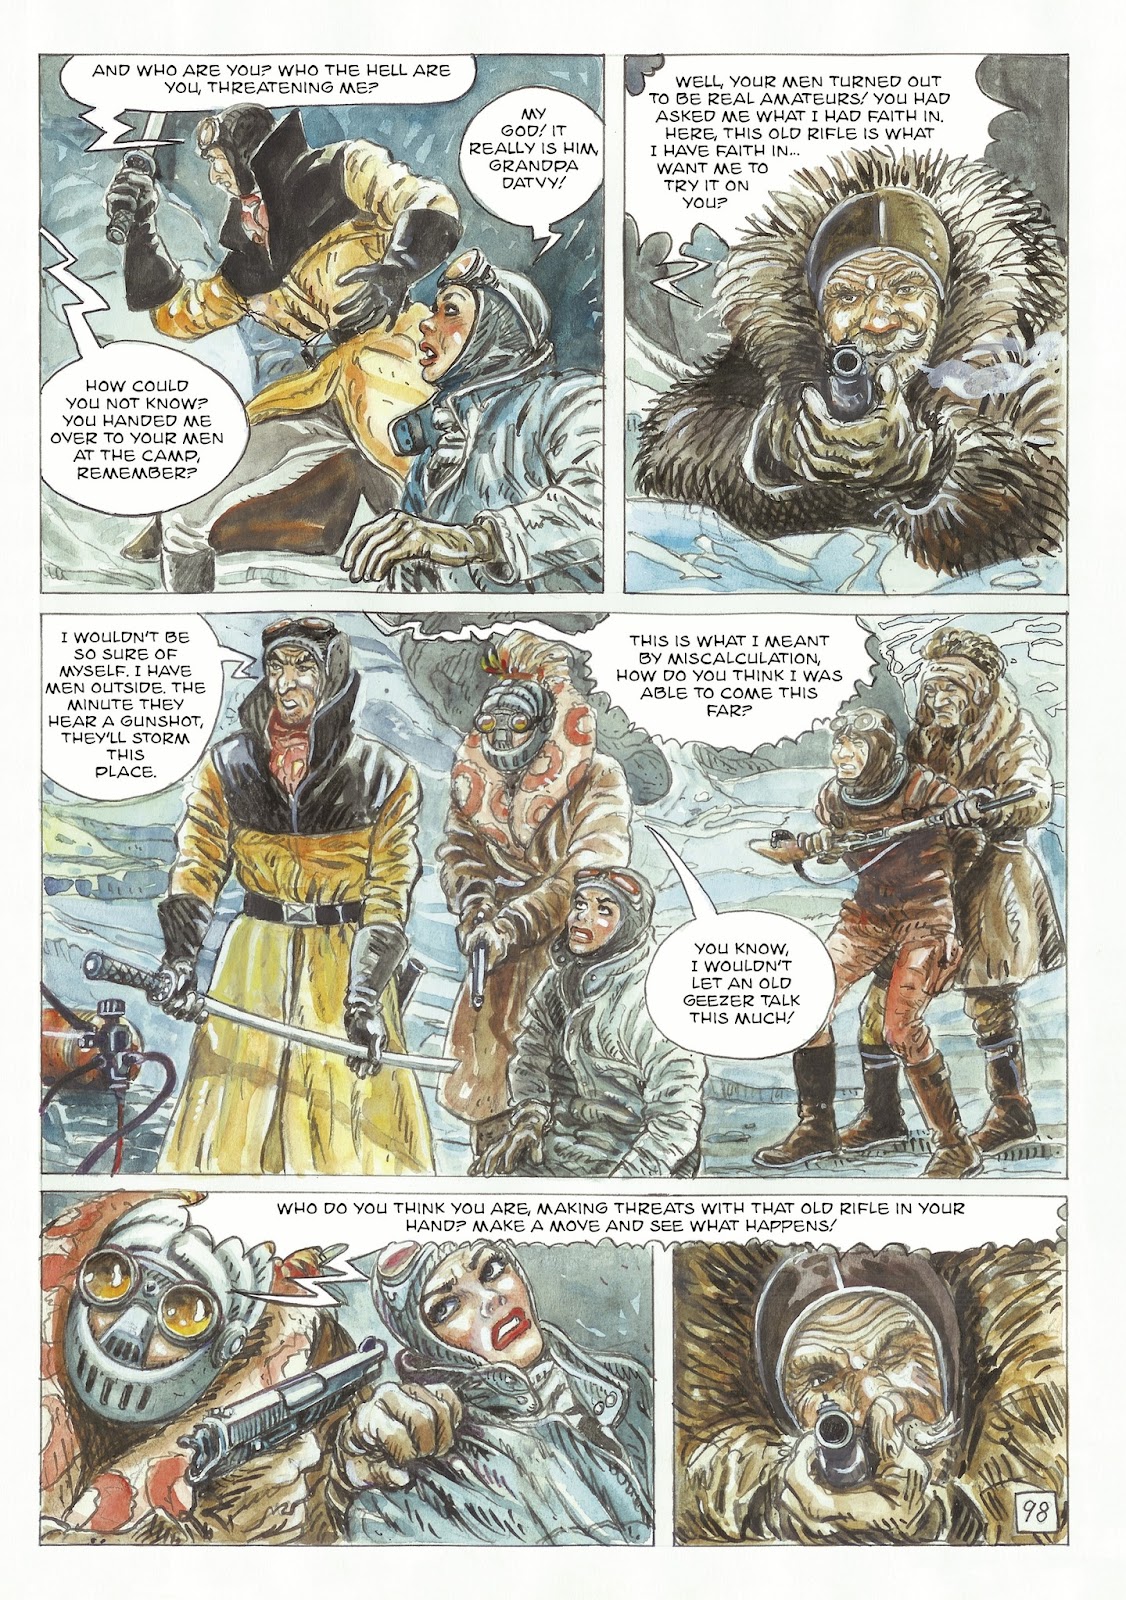 The Man With the Bear issue 2 - Page 44